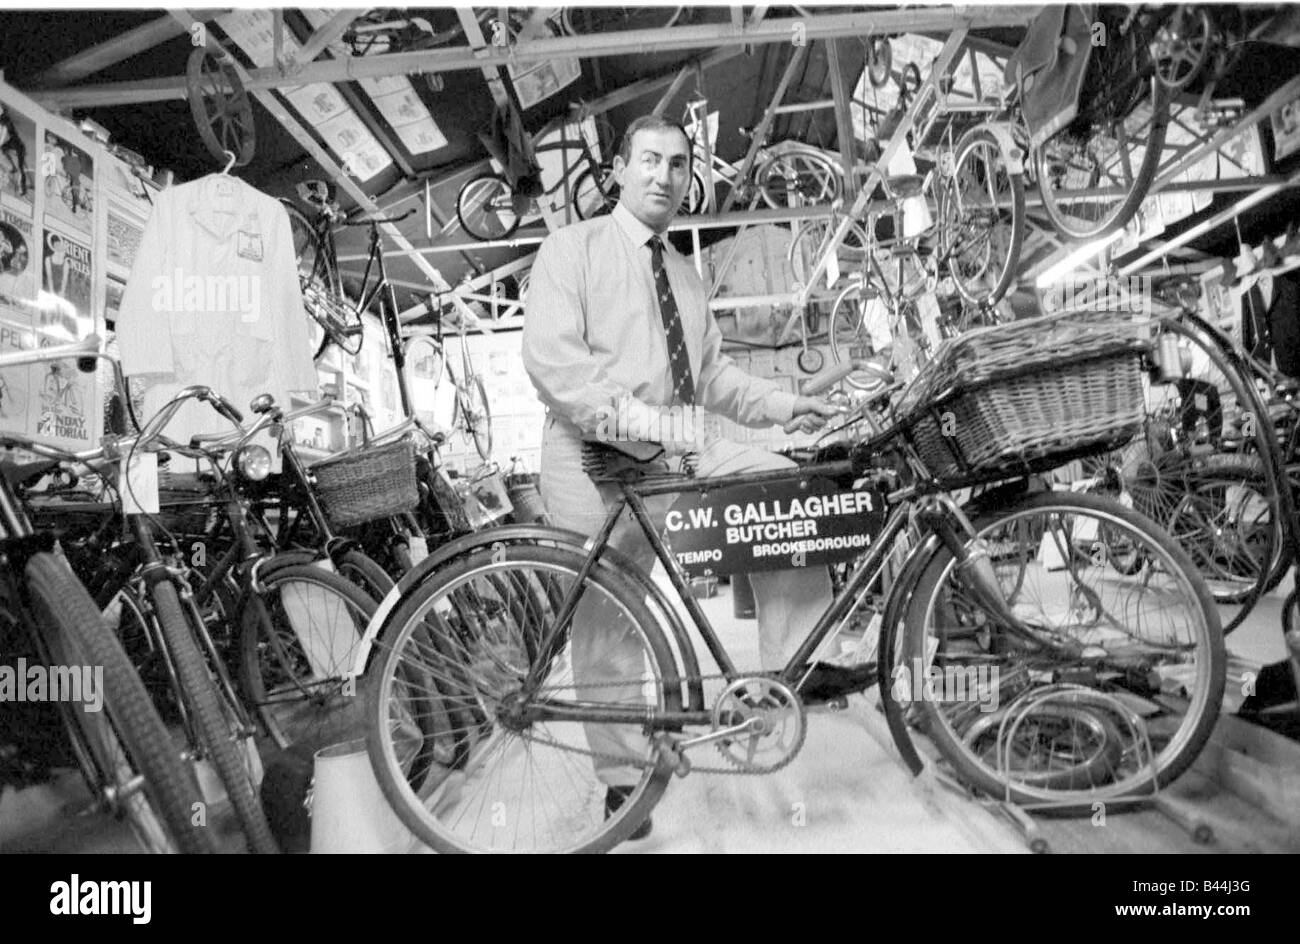 Robert Coalter curator and restorer of vintage bikes at the Brookeborough Vintage Cycle Museum circa 1970s Stock Photo